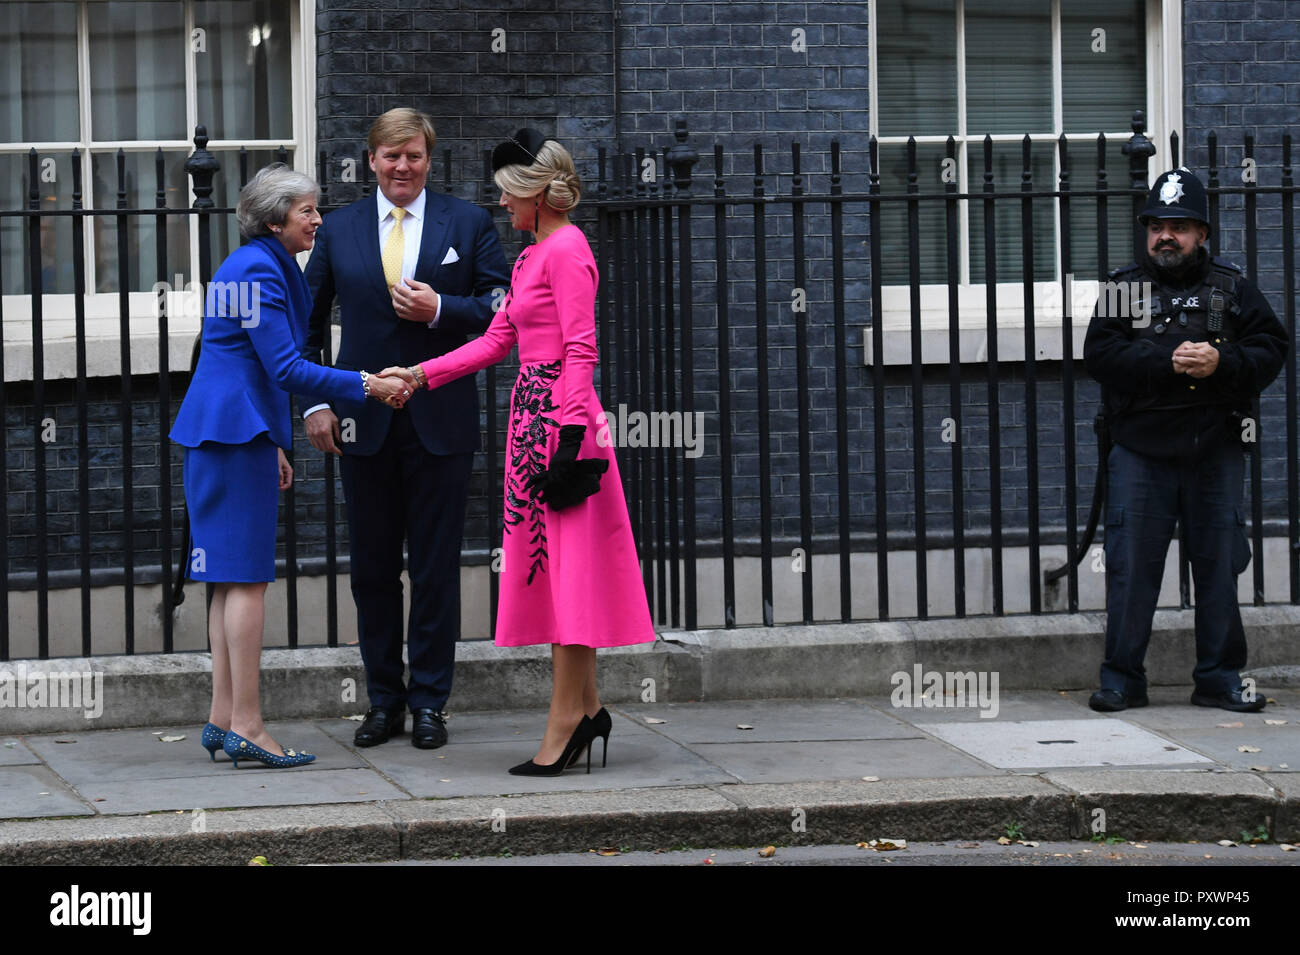 King Willem-Alexander and Queen Maxima of the Netherlands arrive at 10 Downing Street, London, ahead of their meeting with Prime Minister Theresa May, as part of their State Visit to the UK. Stock Photo